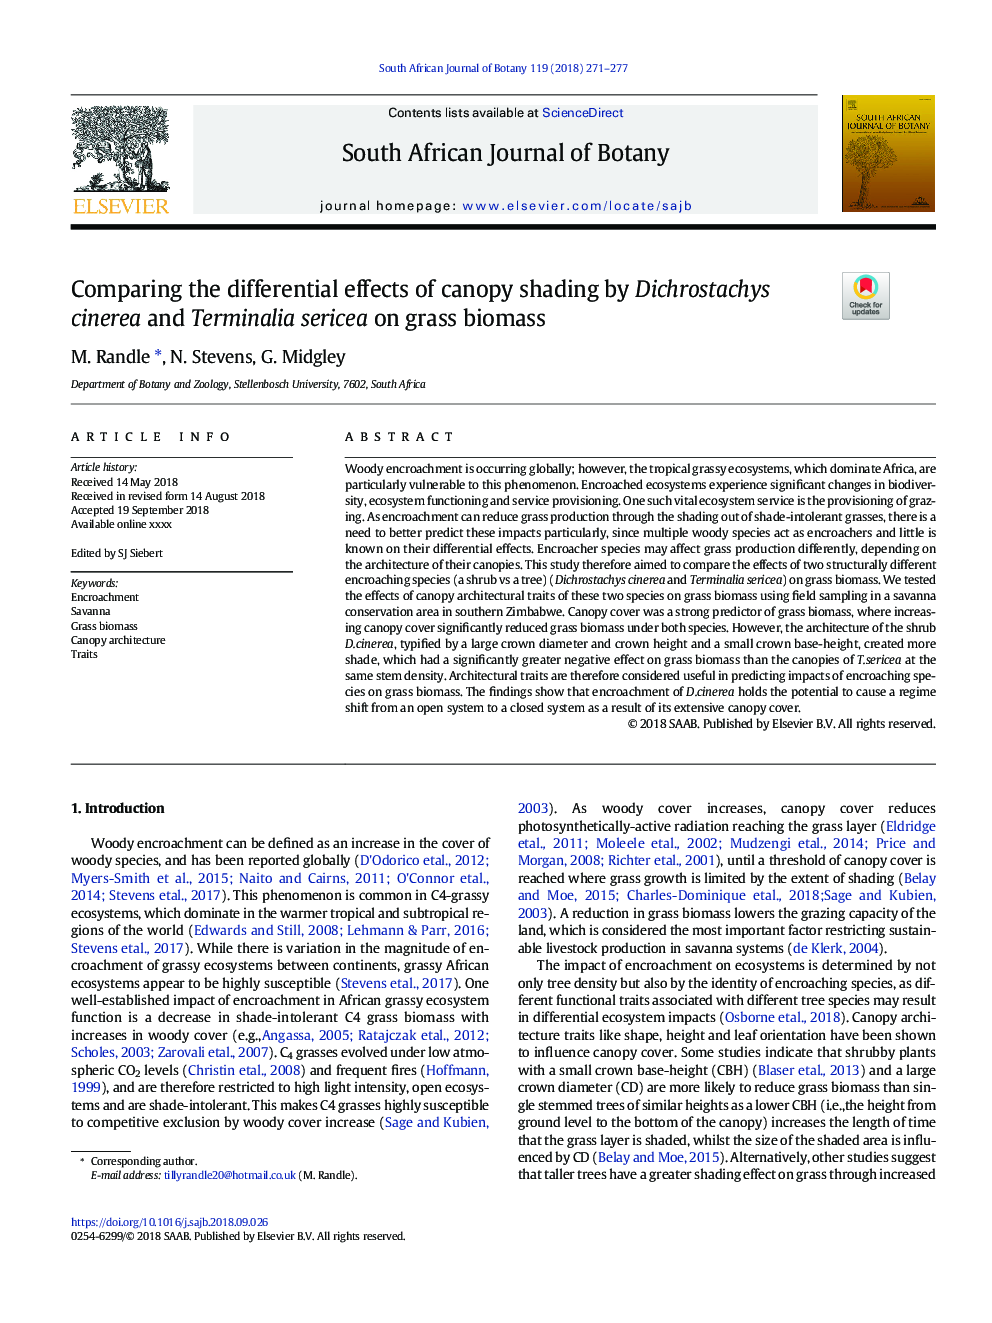 Comparing the differential effects of canopy shading by Dichrostachys cinerea and Terminalia sericea on grass biomass